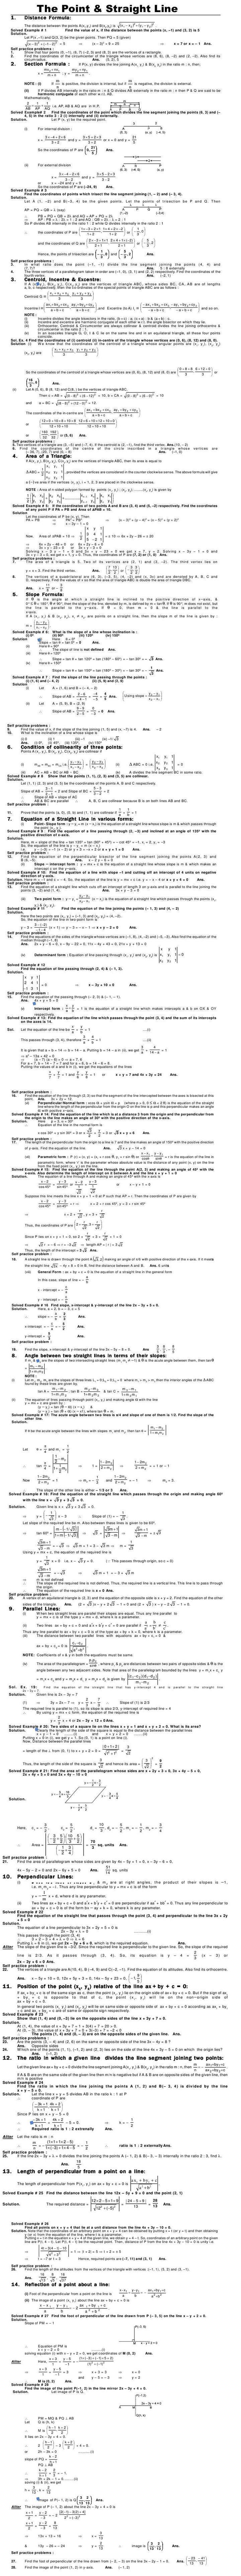 Maths Study Material - Chapter 17